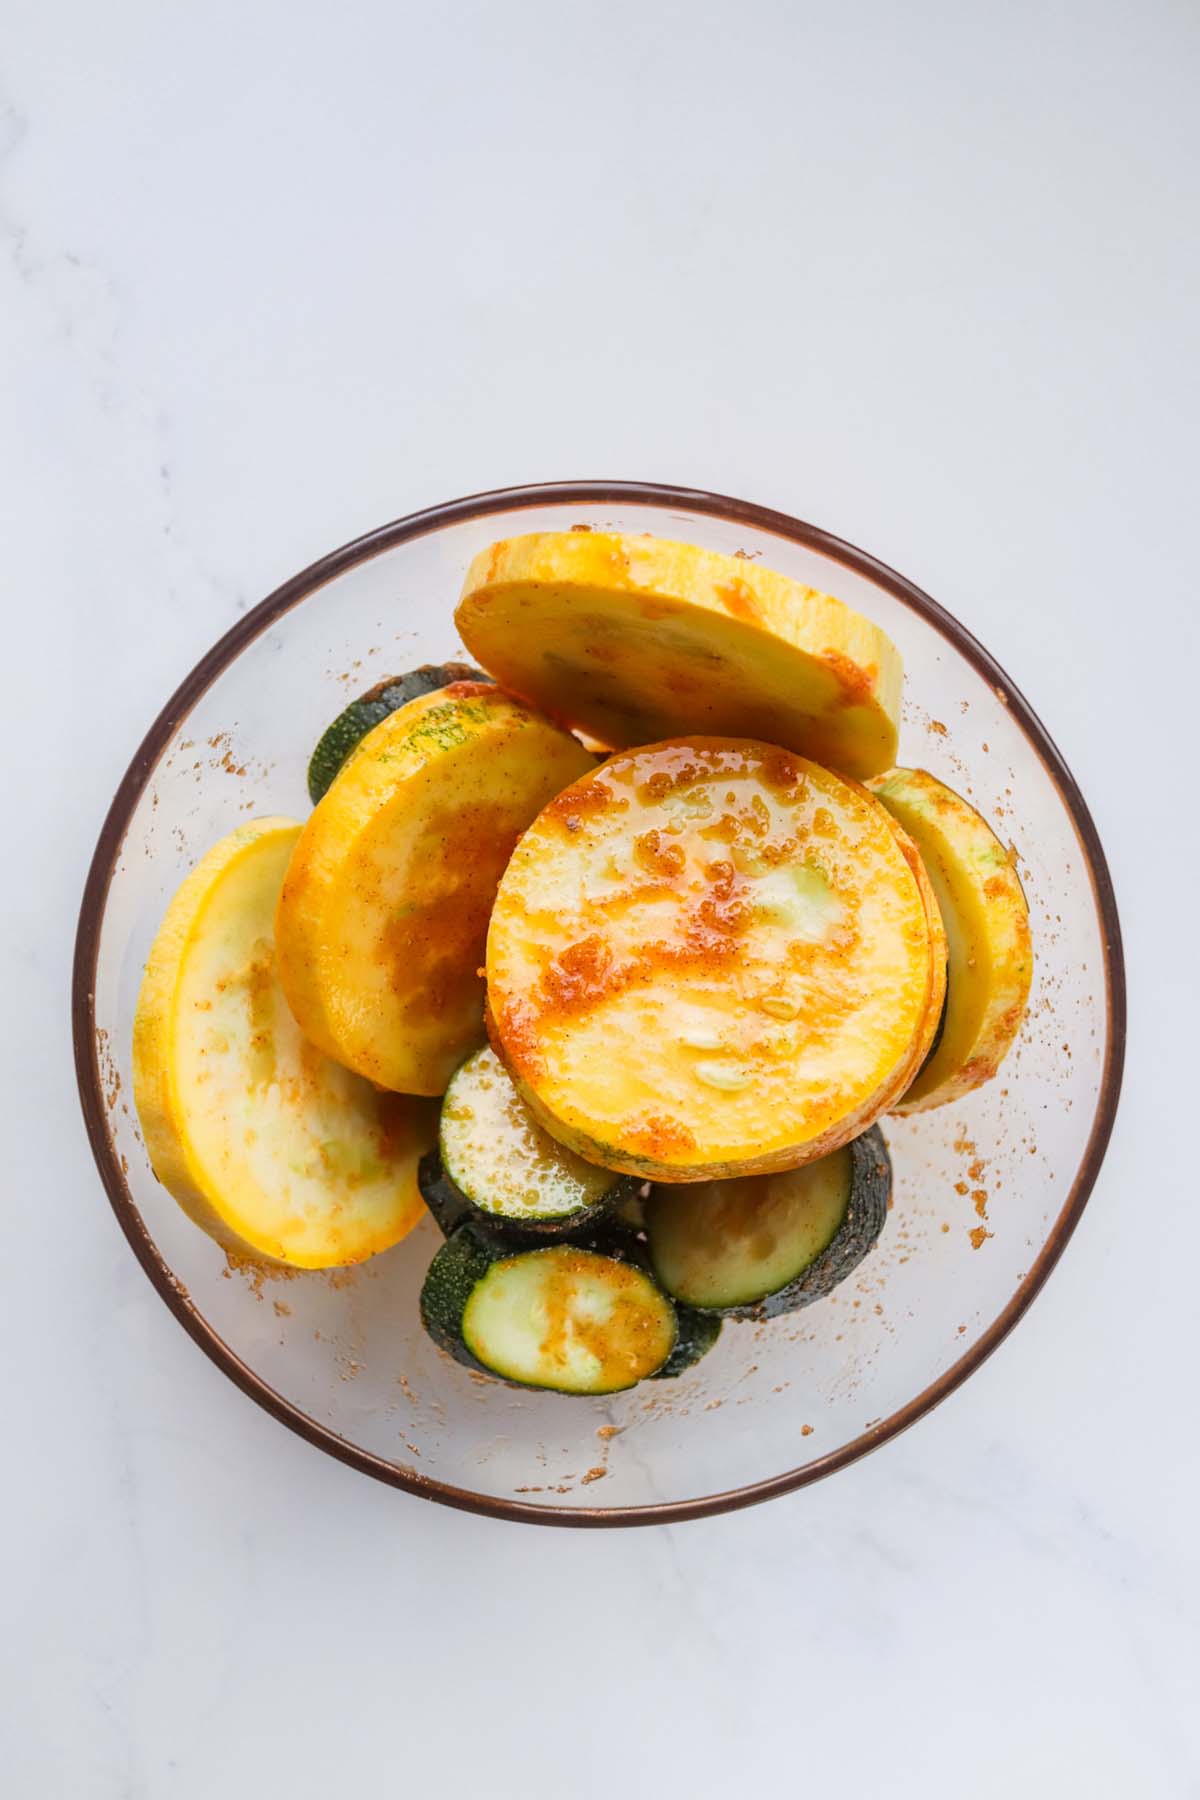 Squash slices mixed with the seasoning.